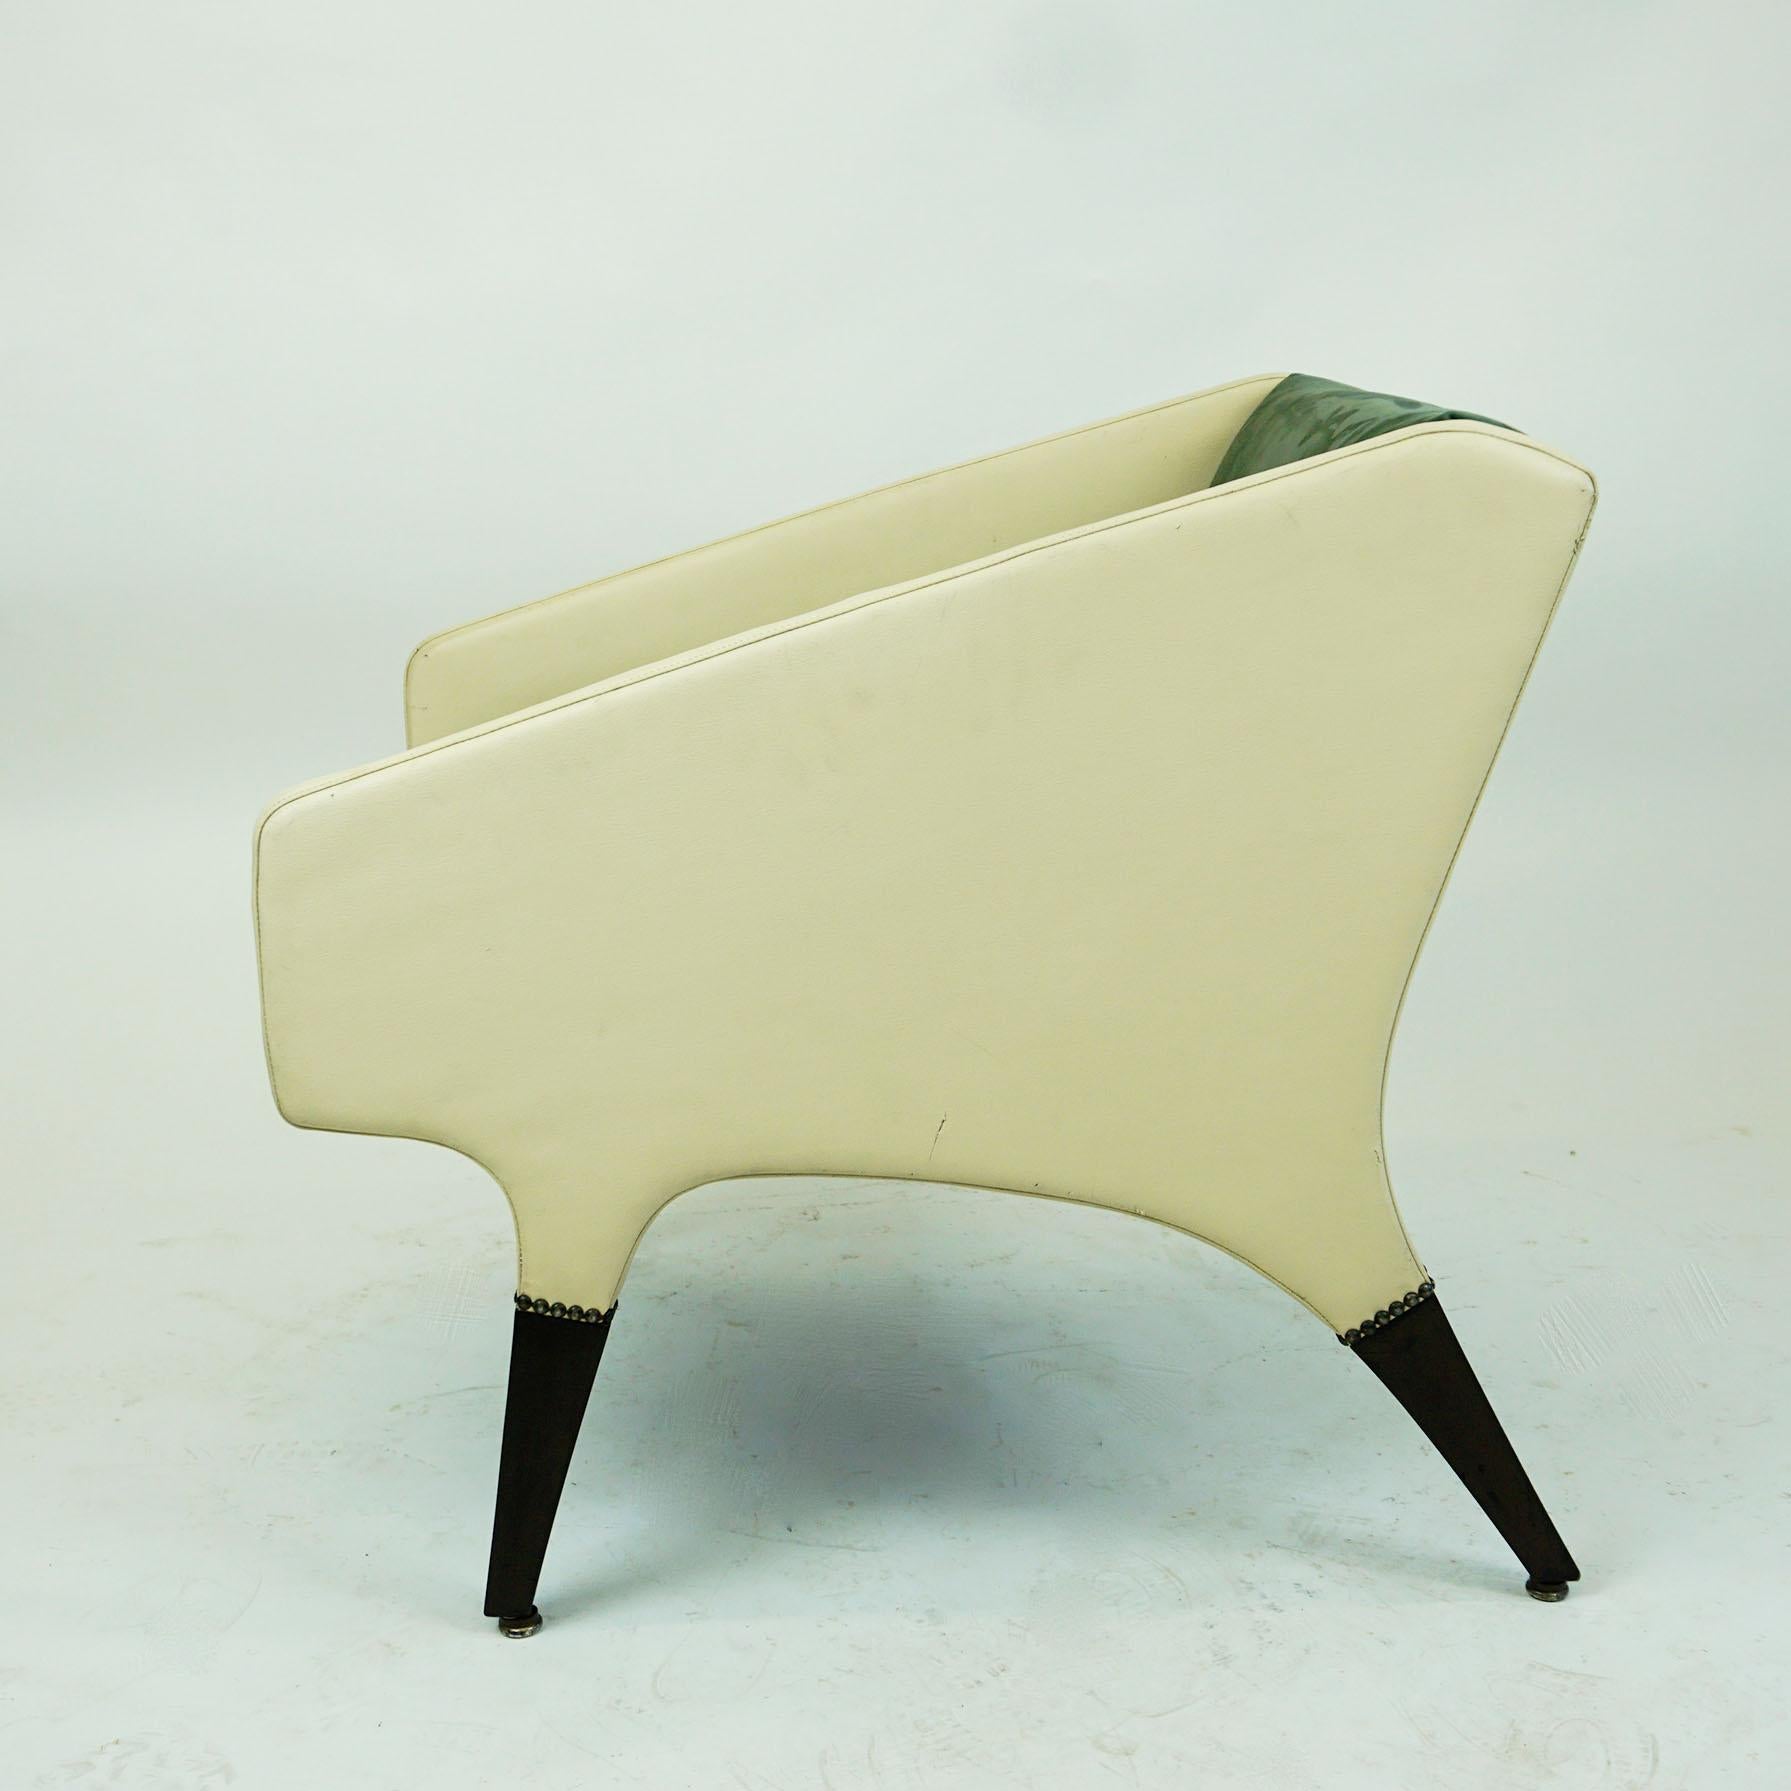 Italian Midcentury Parco dei Principi Lounge Chair by Gio Ponti for Cassina 5